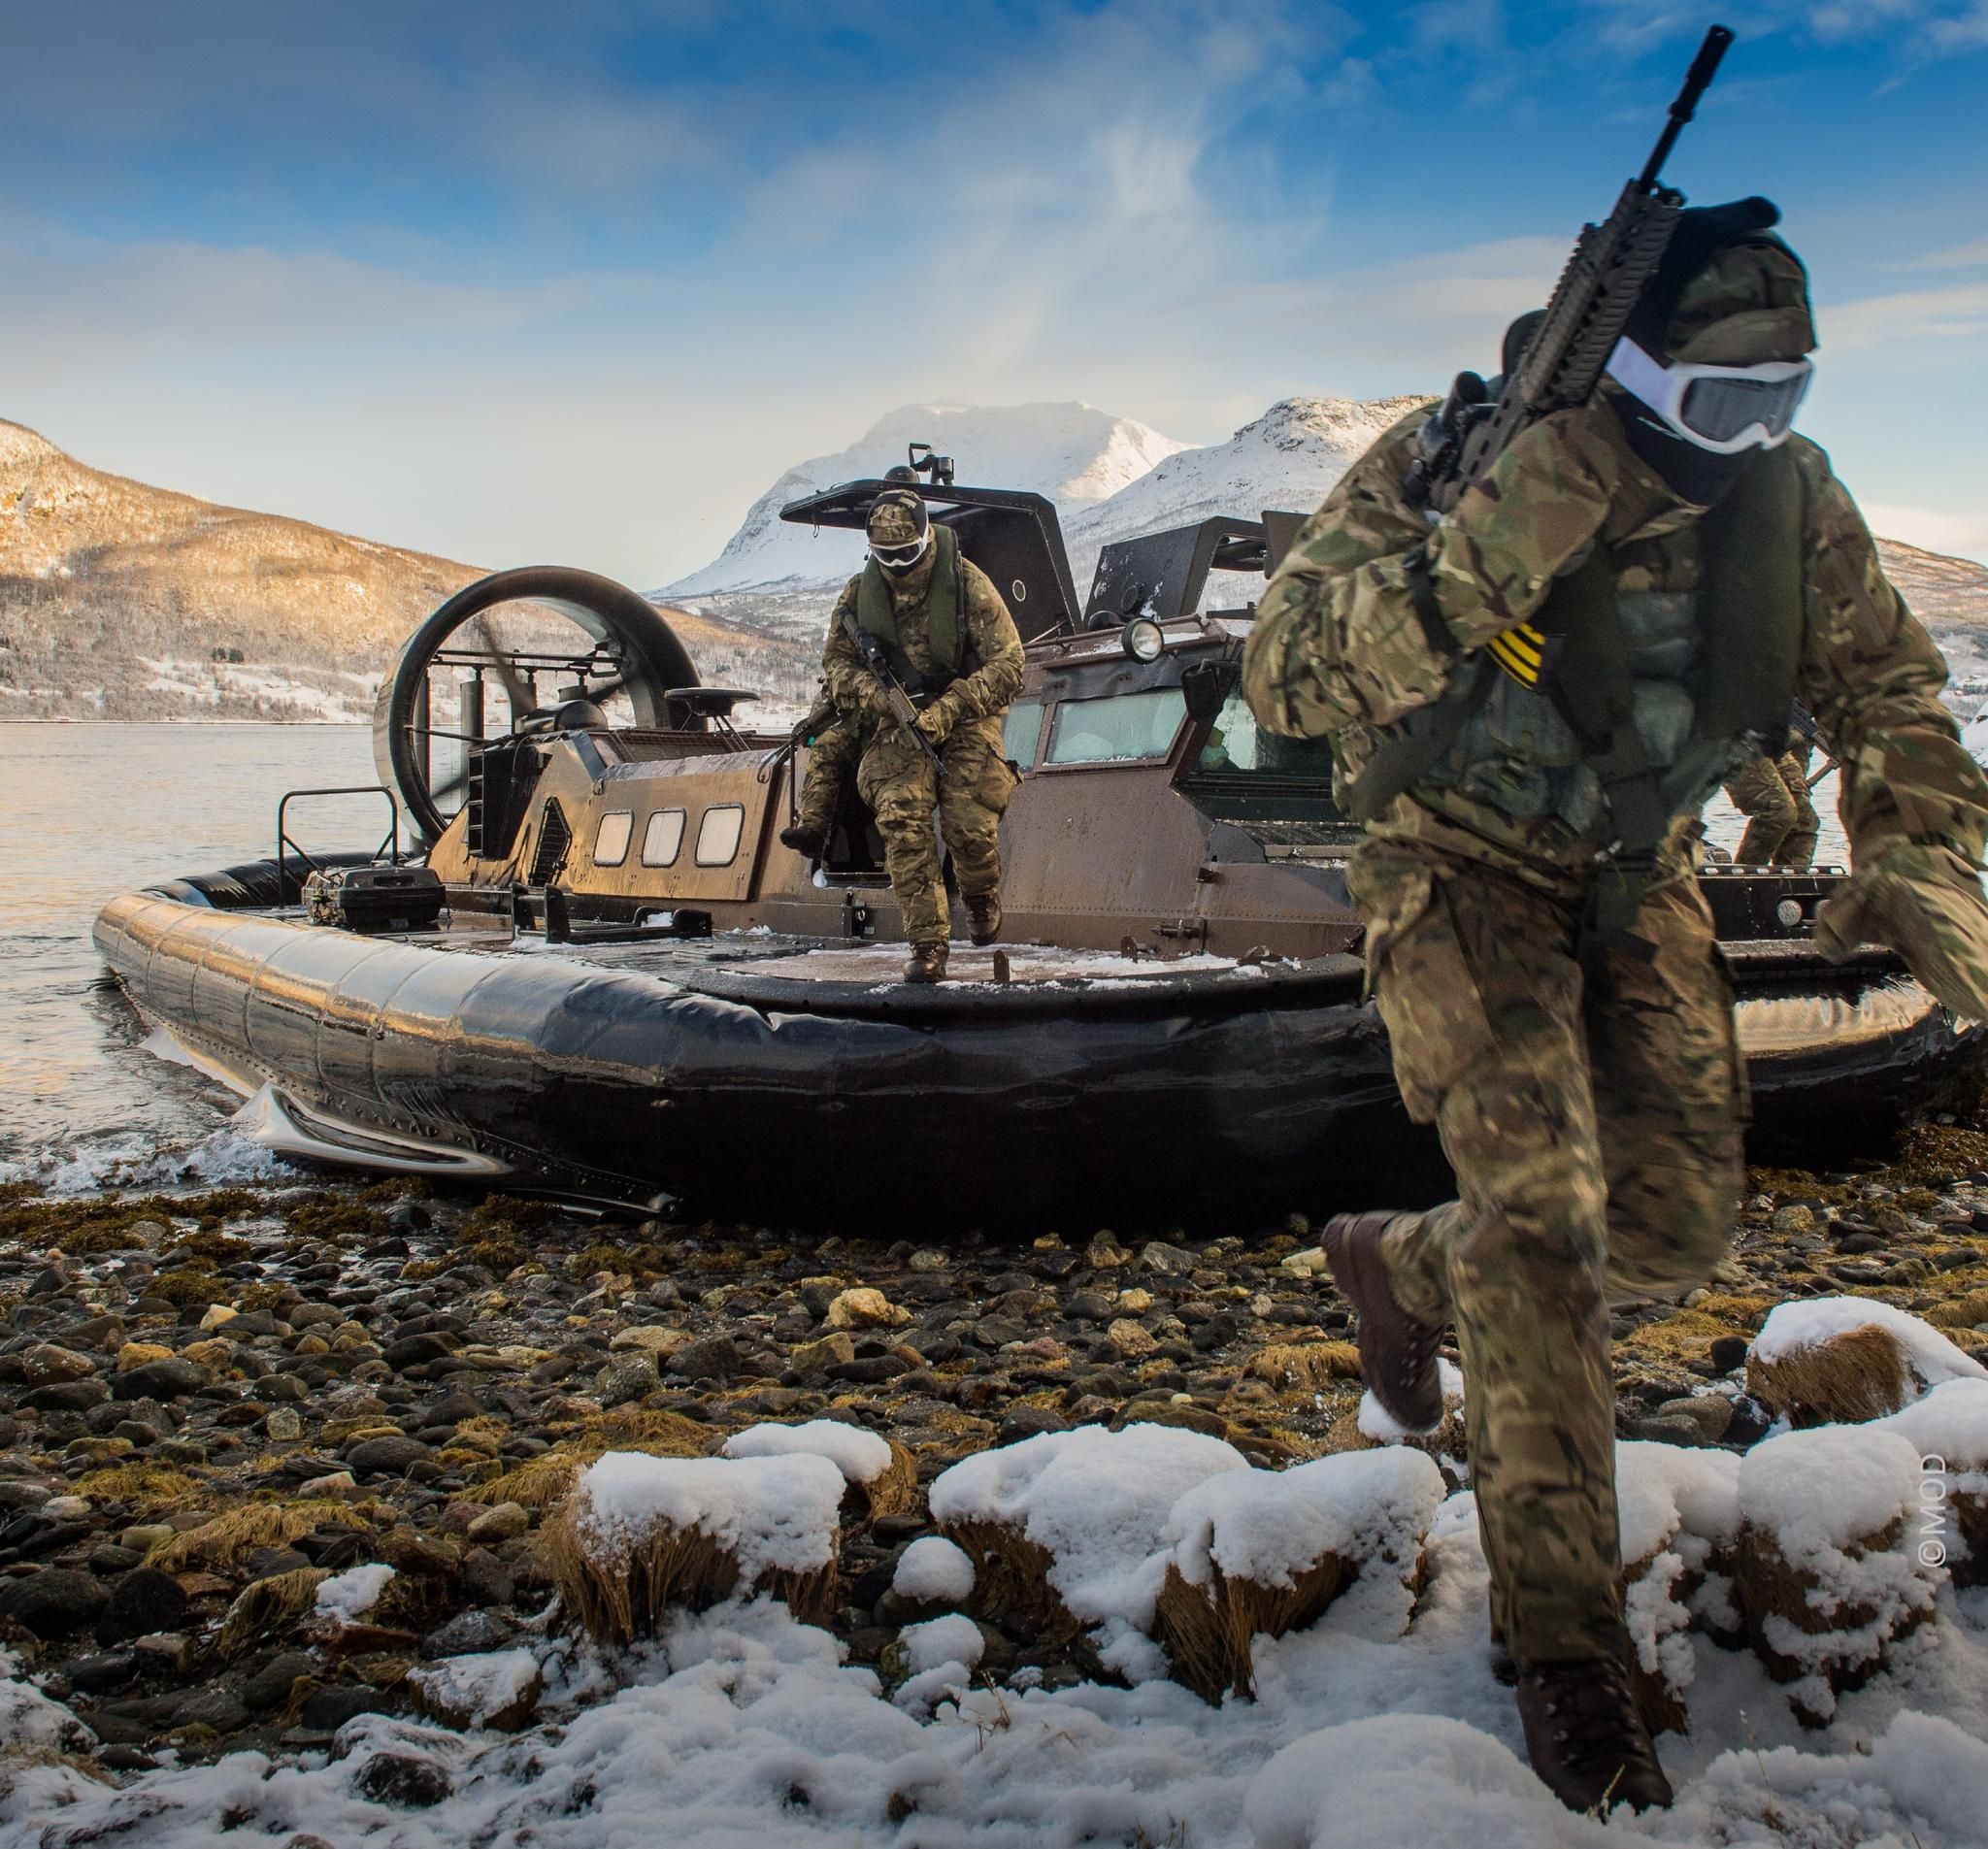 Cold weather Rigid Inflatable Boat soldier attack camouflage